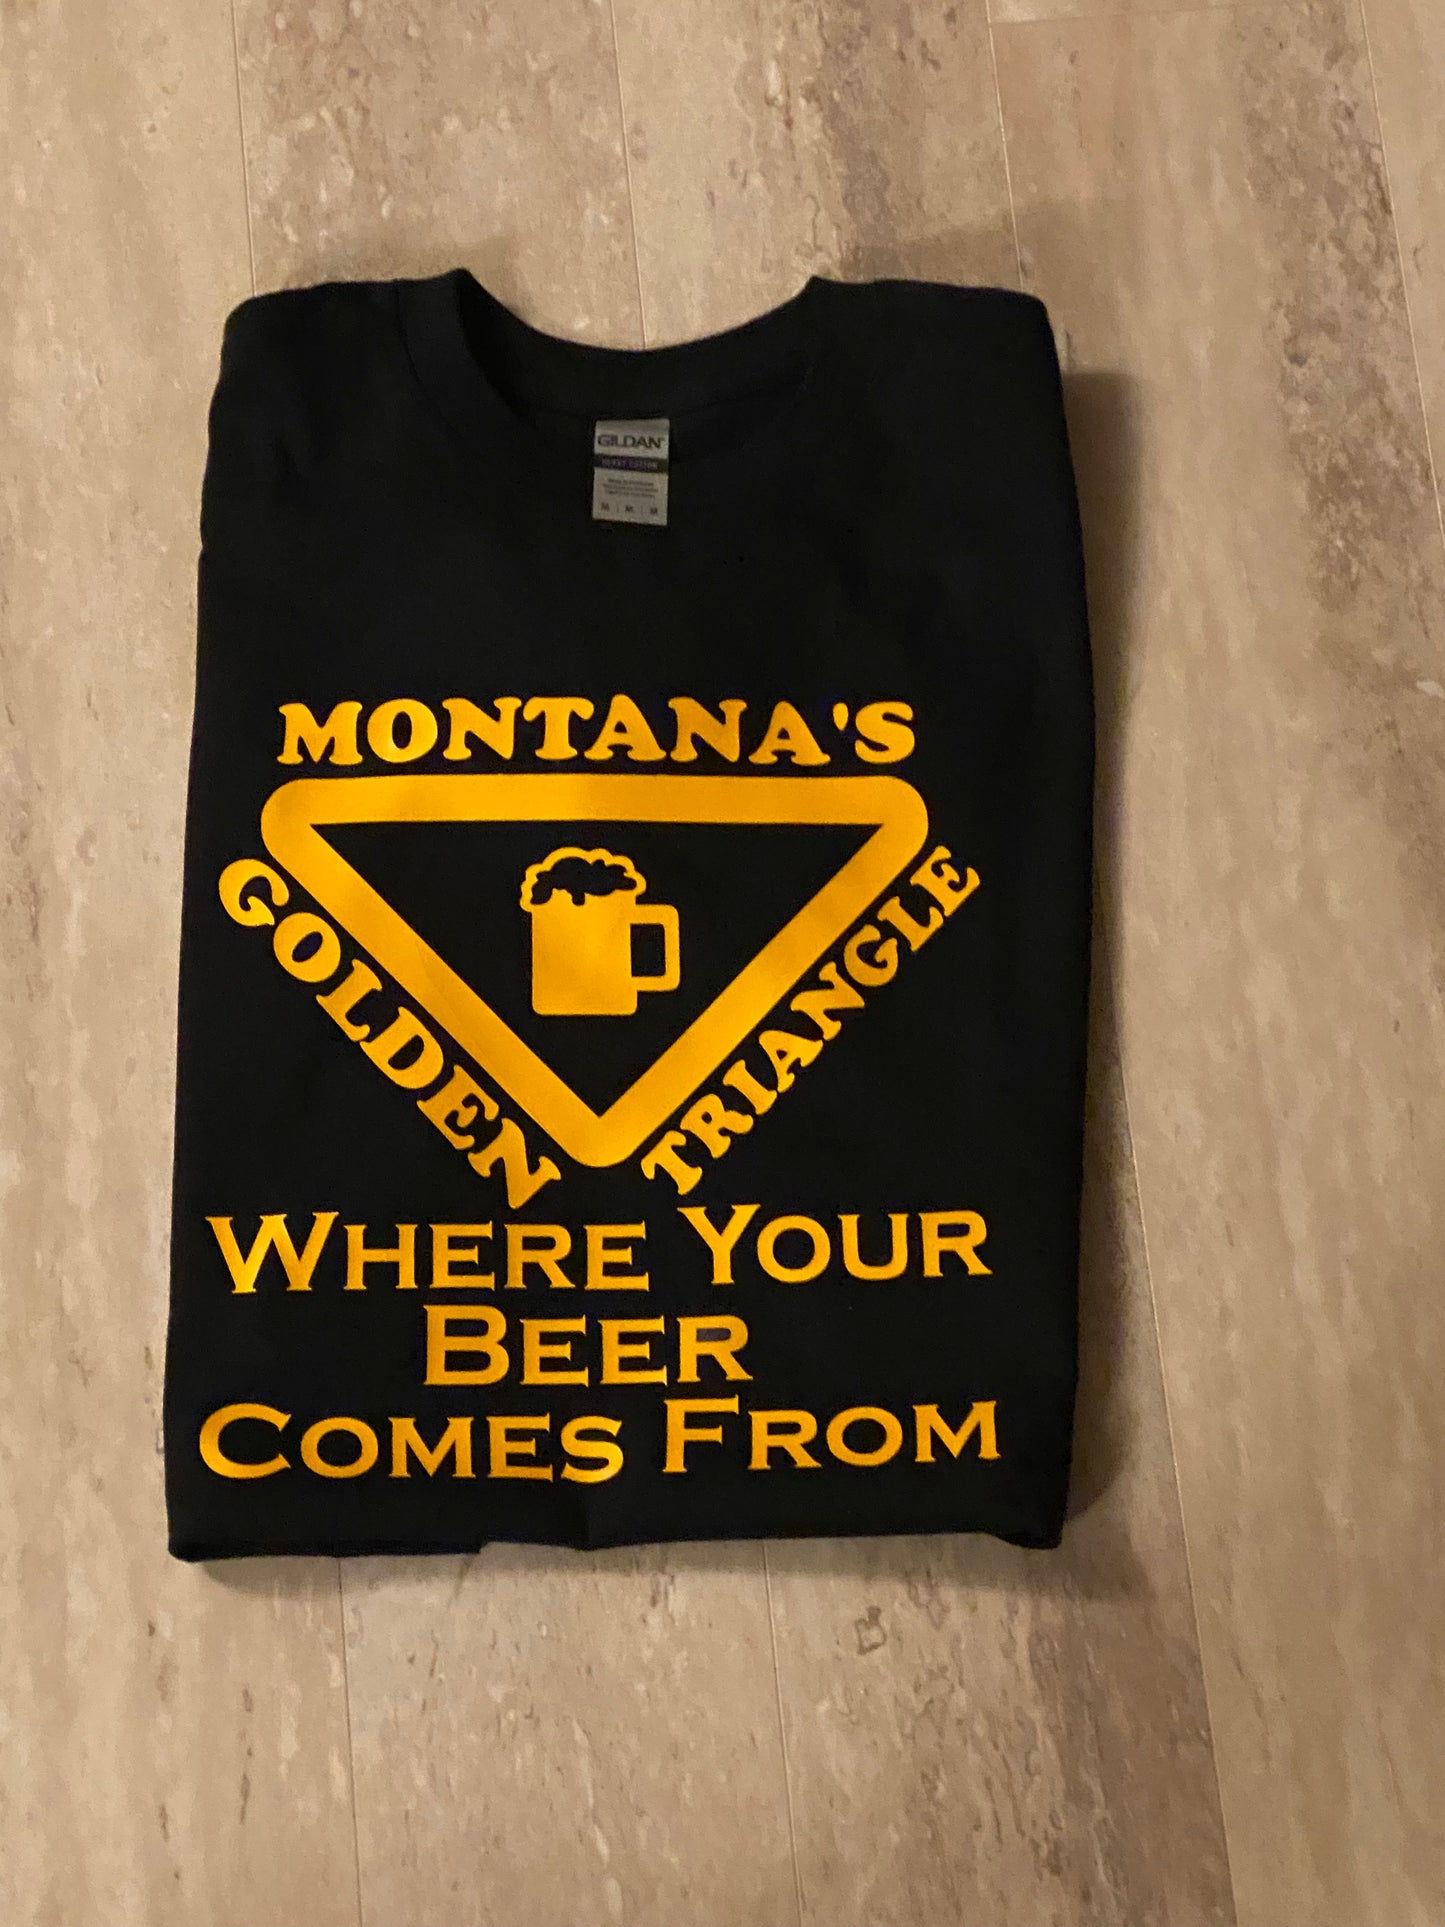 Montana’s Golden Triangle Where your beer comes from t shirt